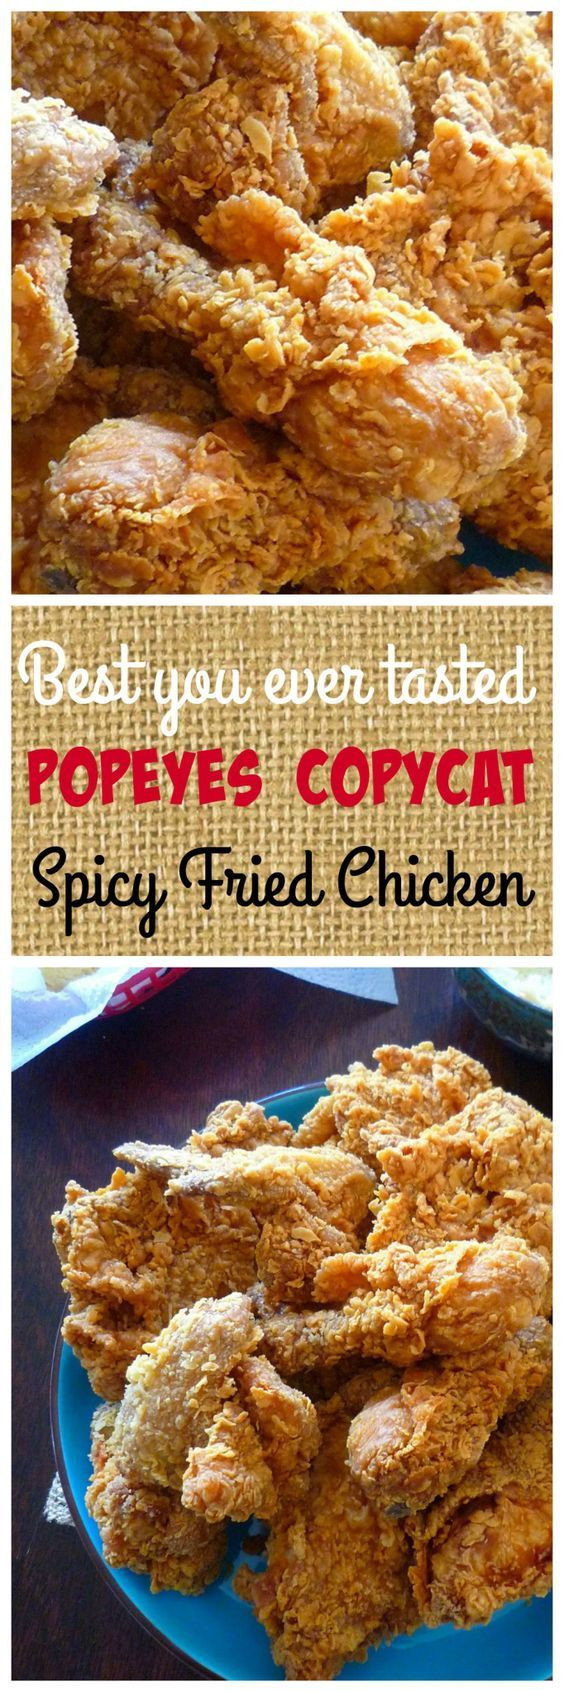 Popeyes Fried Chicken Recipe
 39 best Bob Evans recipes images on Pinterest